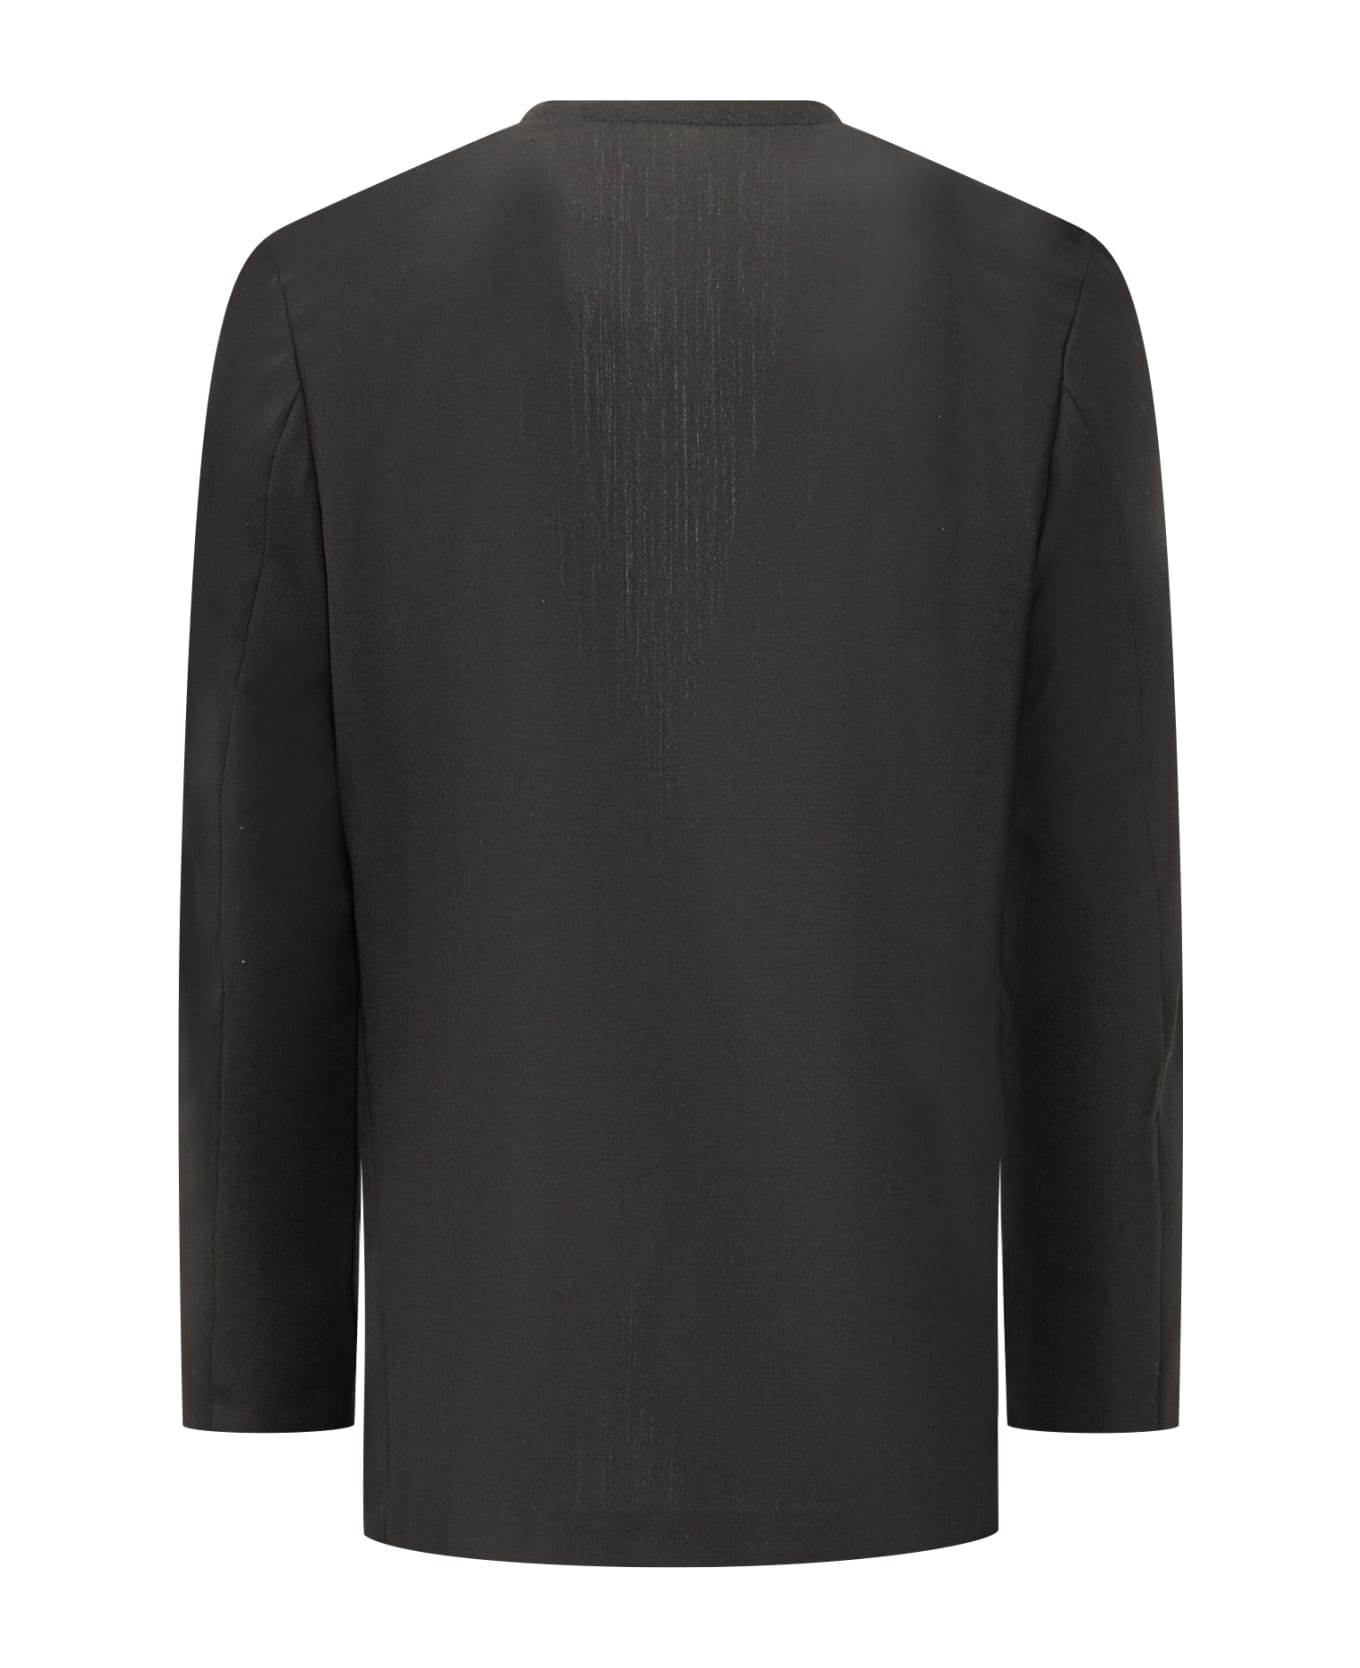 Covert Blazer Open At The Front - NERO